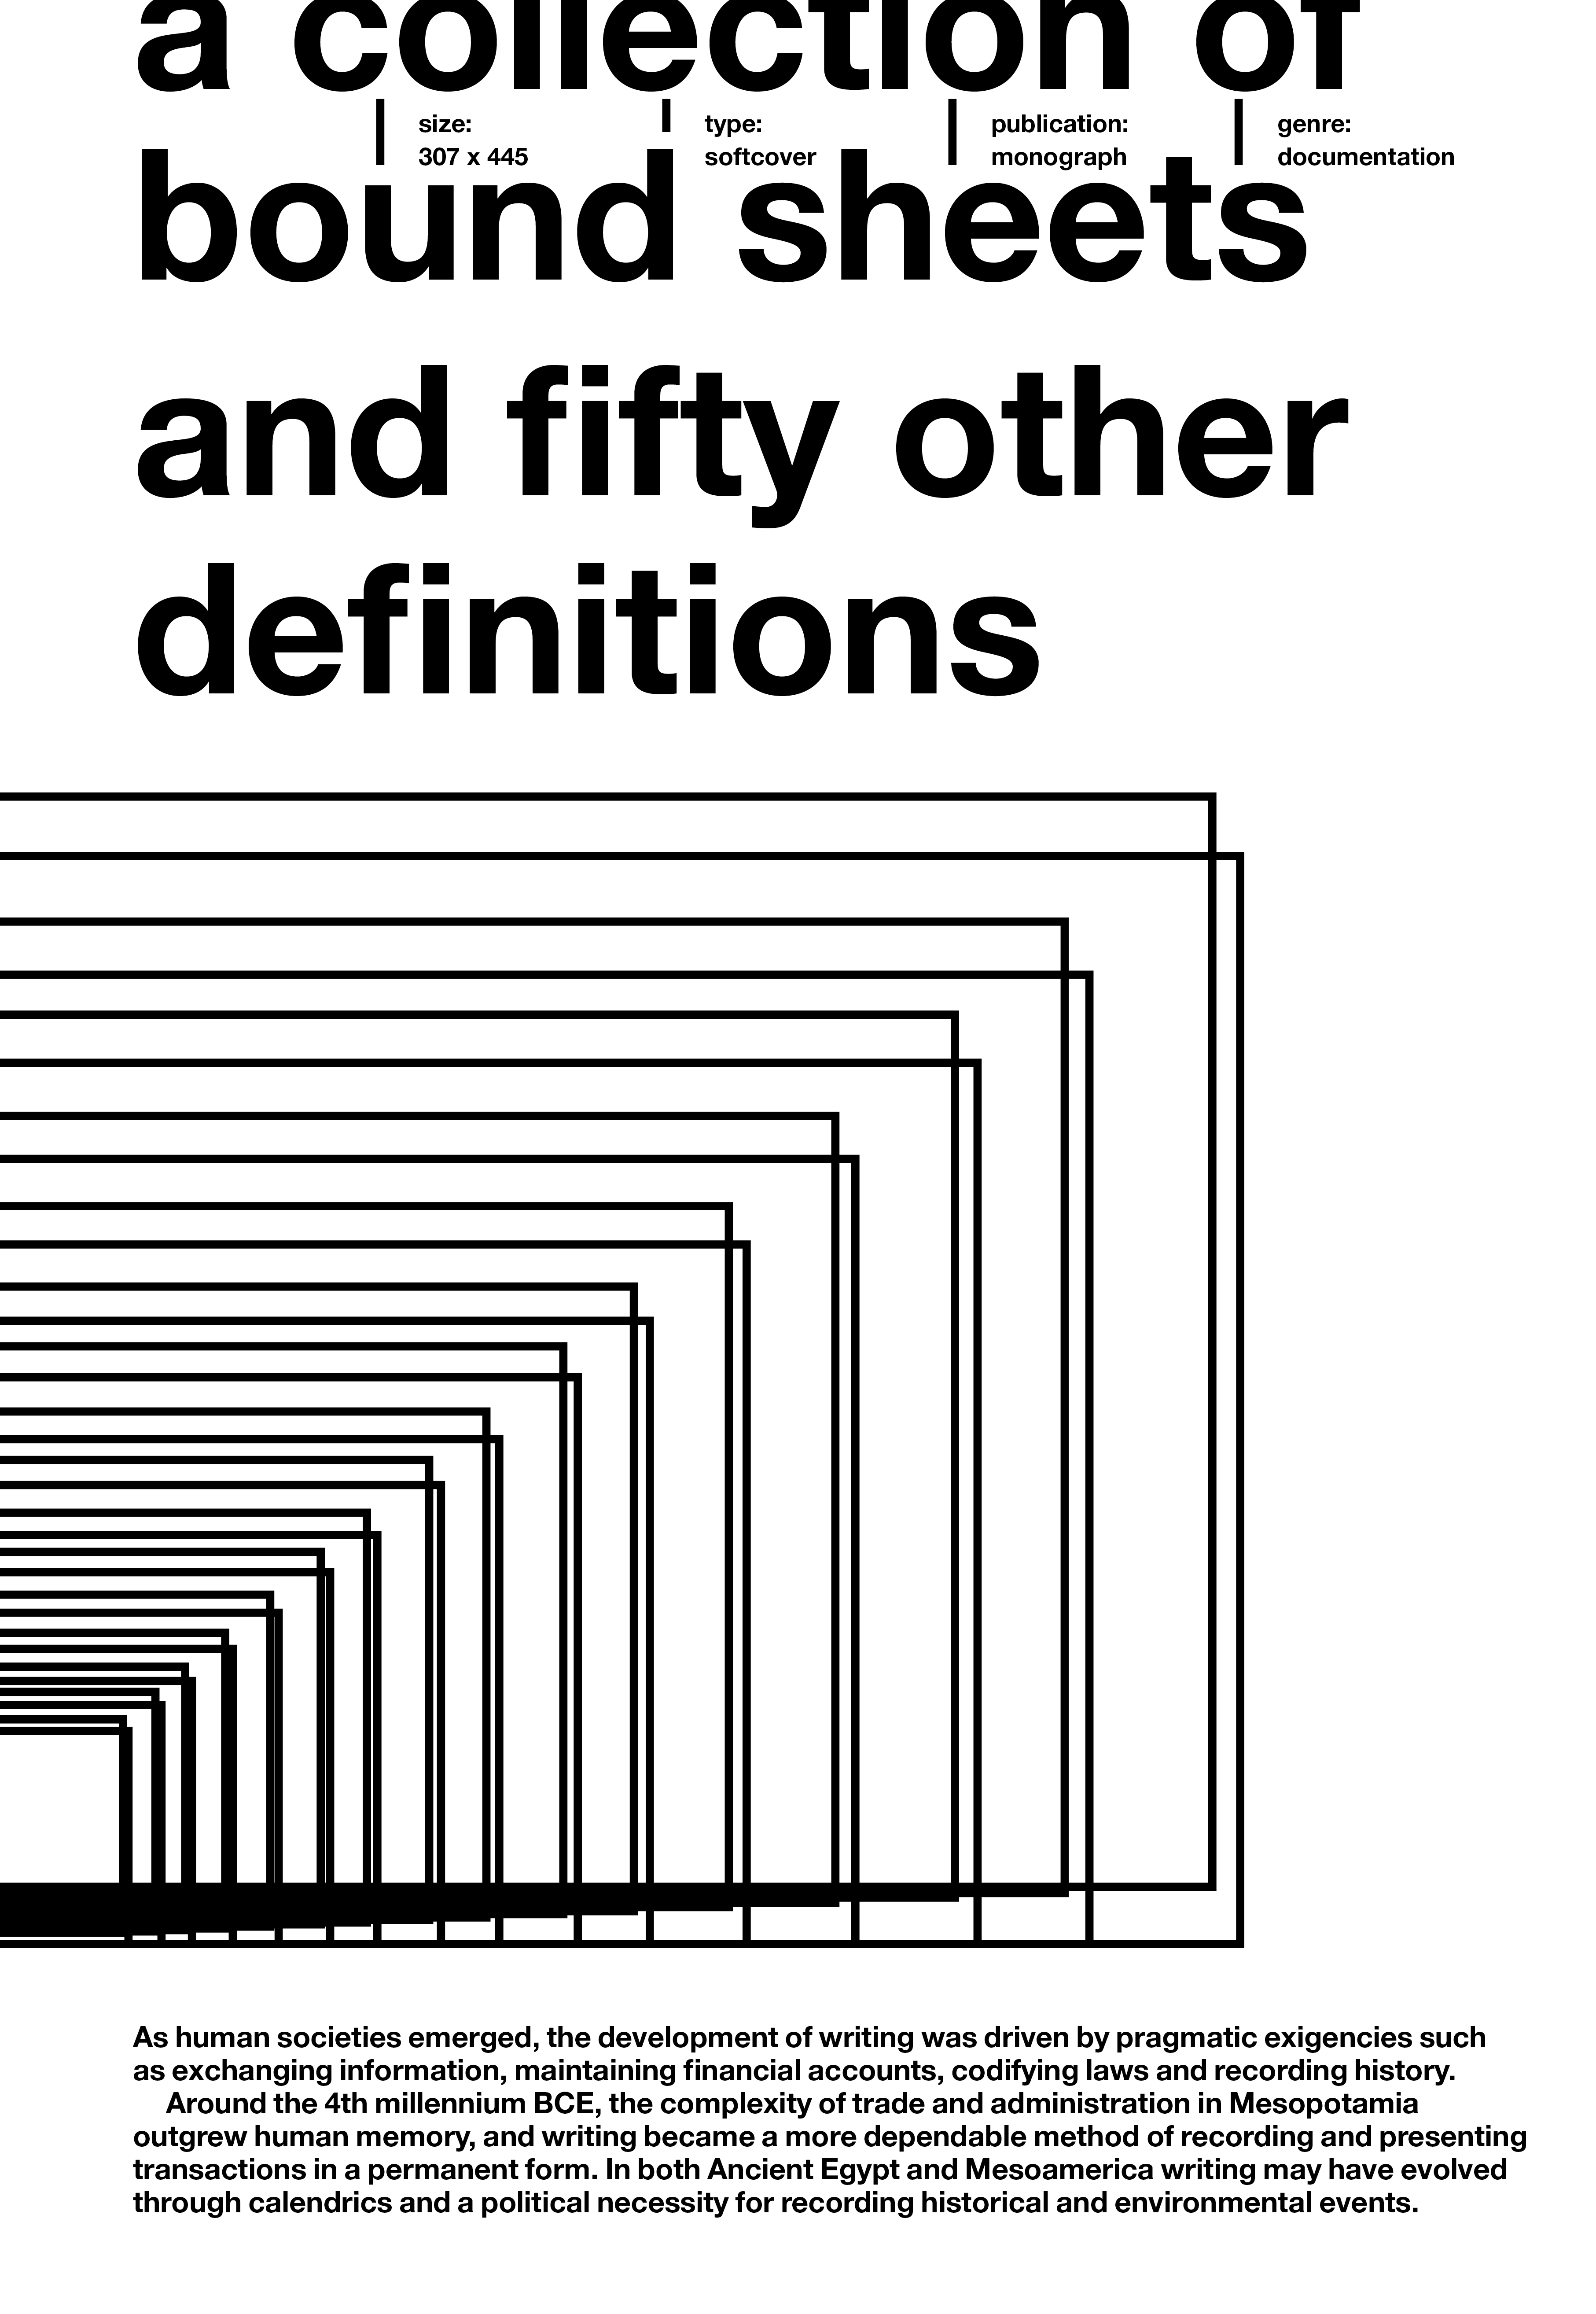 A Collection of Bound Sheets and Fifty other Definitions, door Martijn de Heer